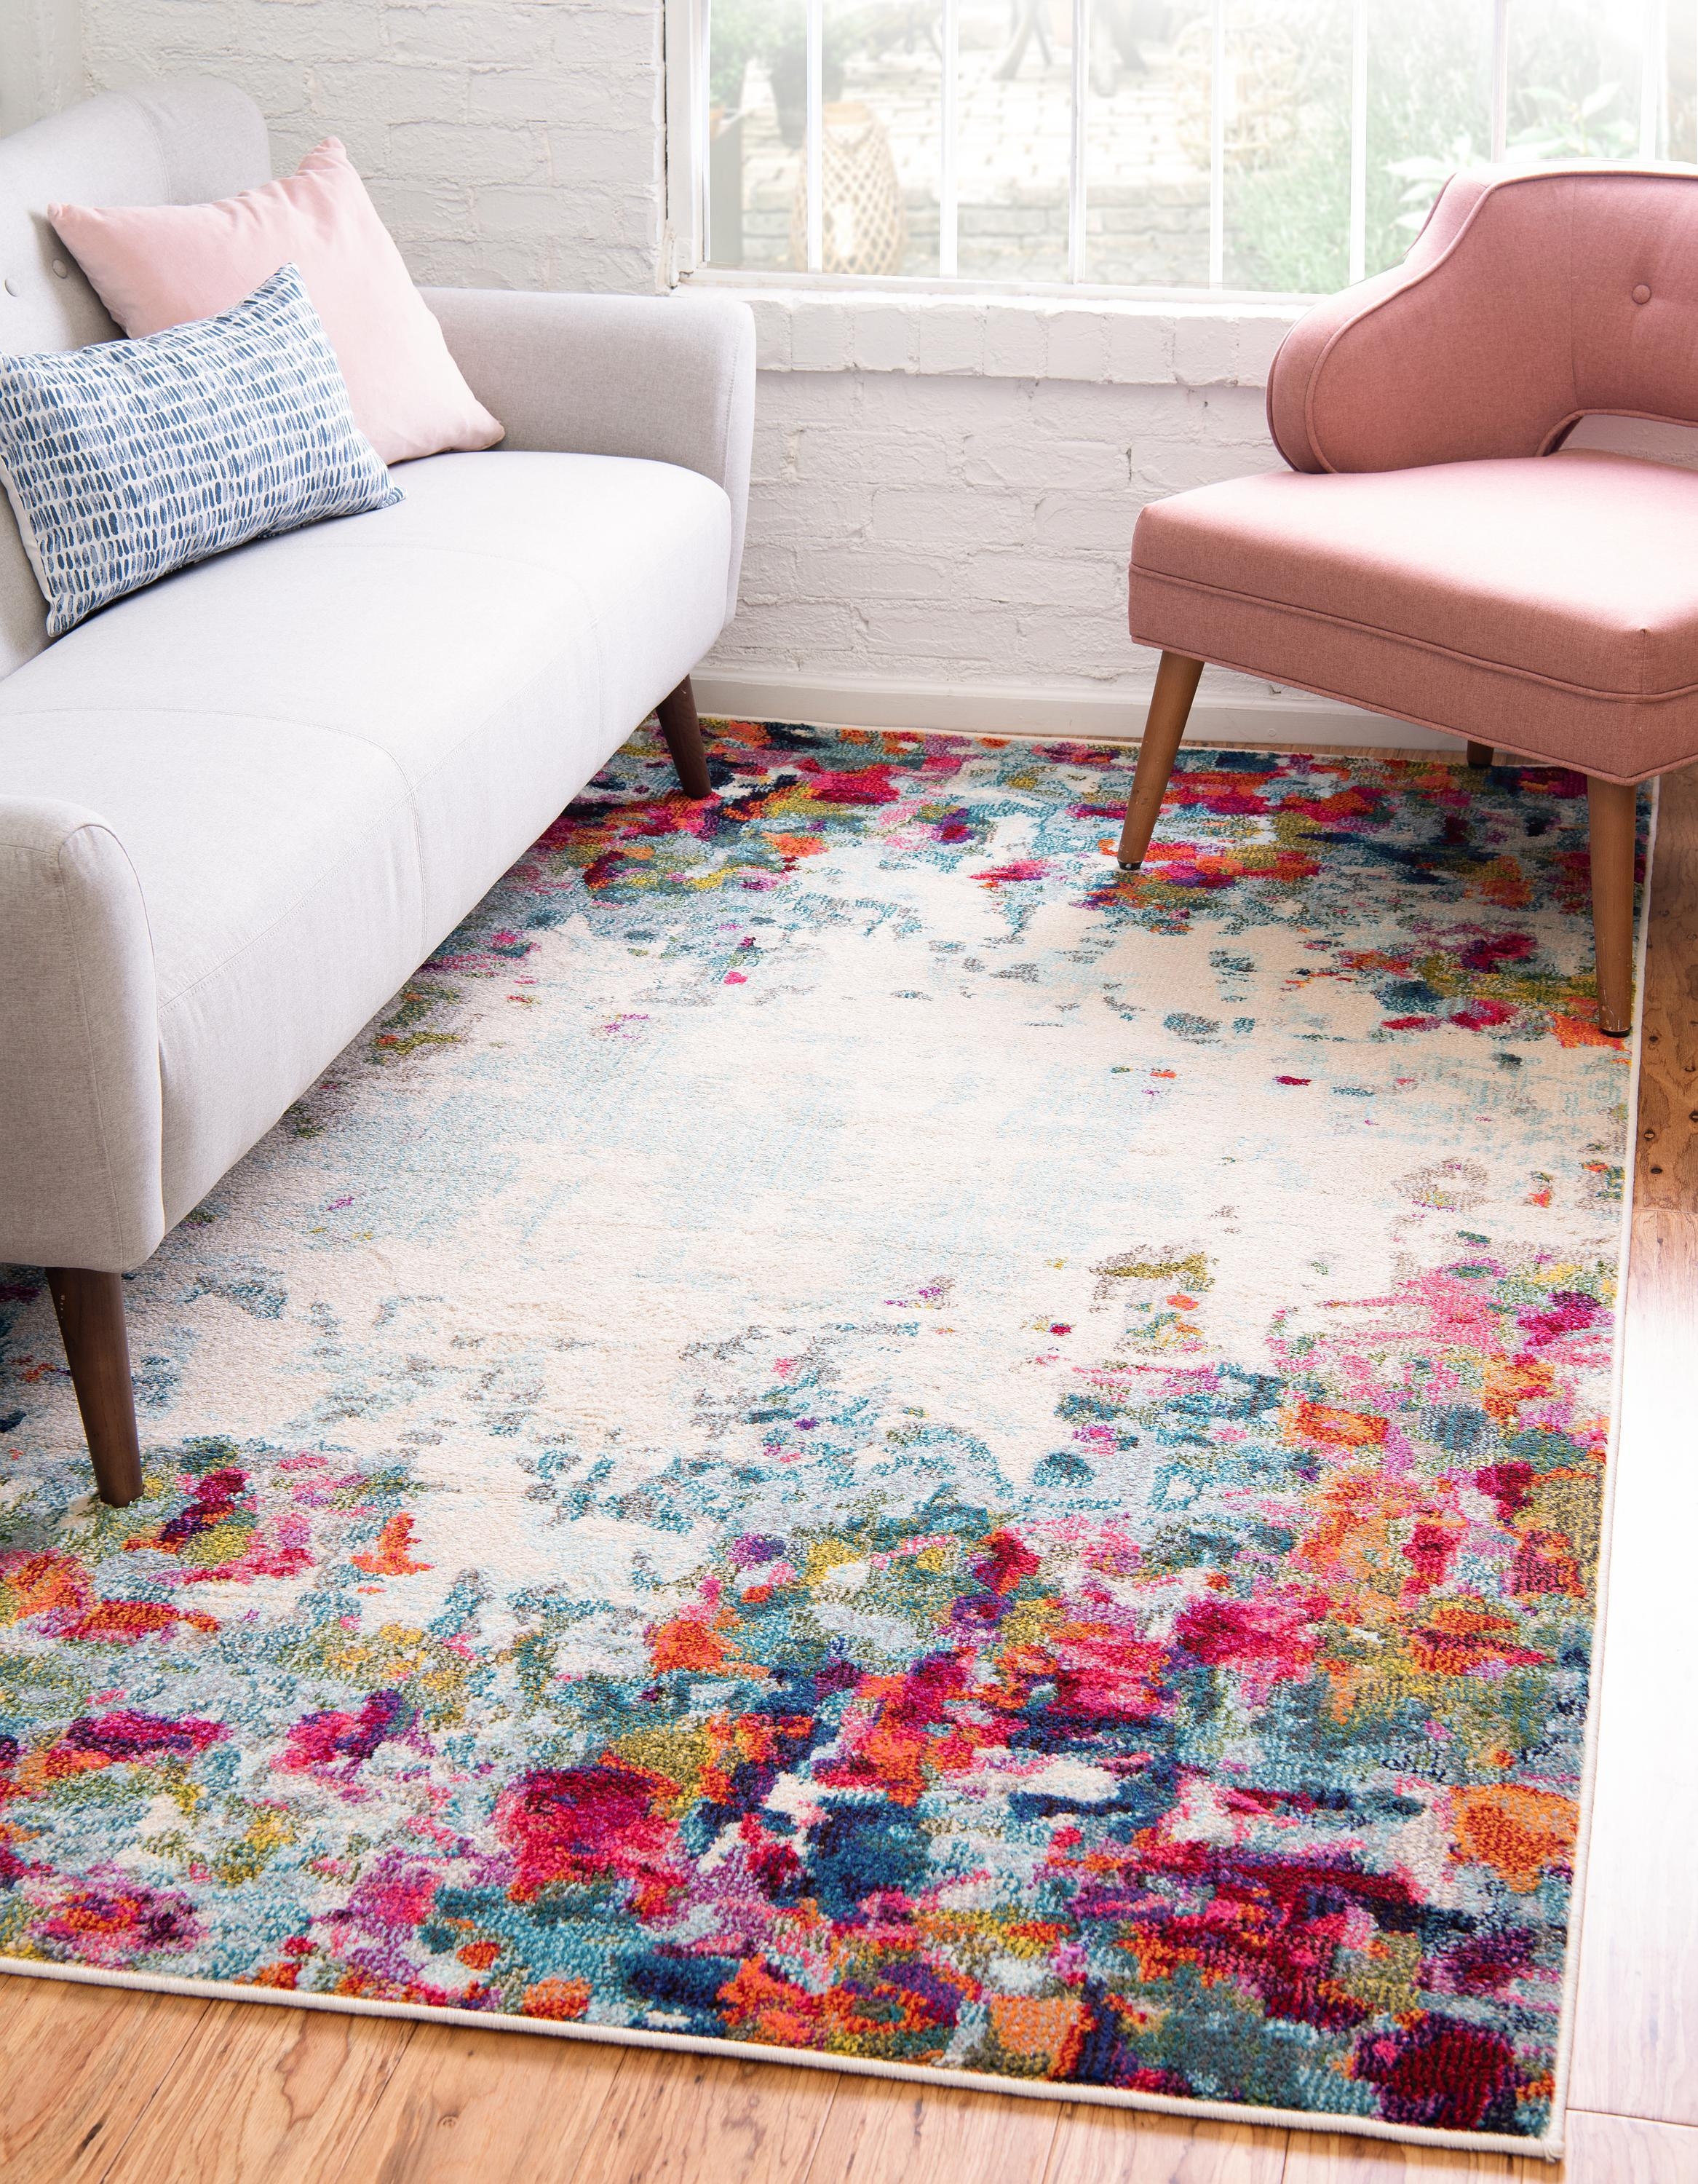 Colorful Rugs For Living Room Visualhunt, Bright Colored Area Rugs